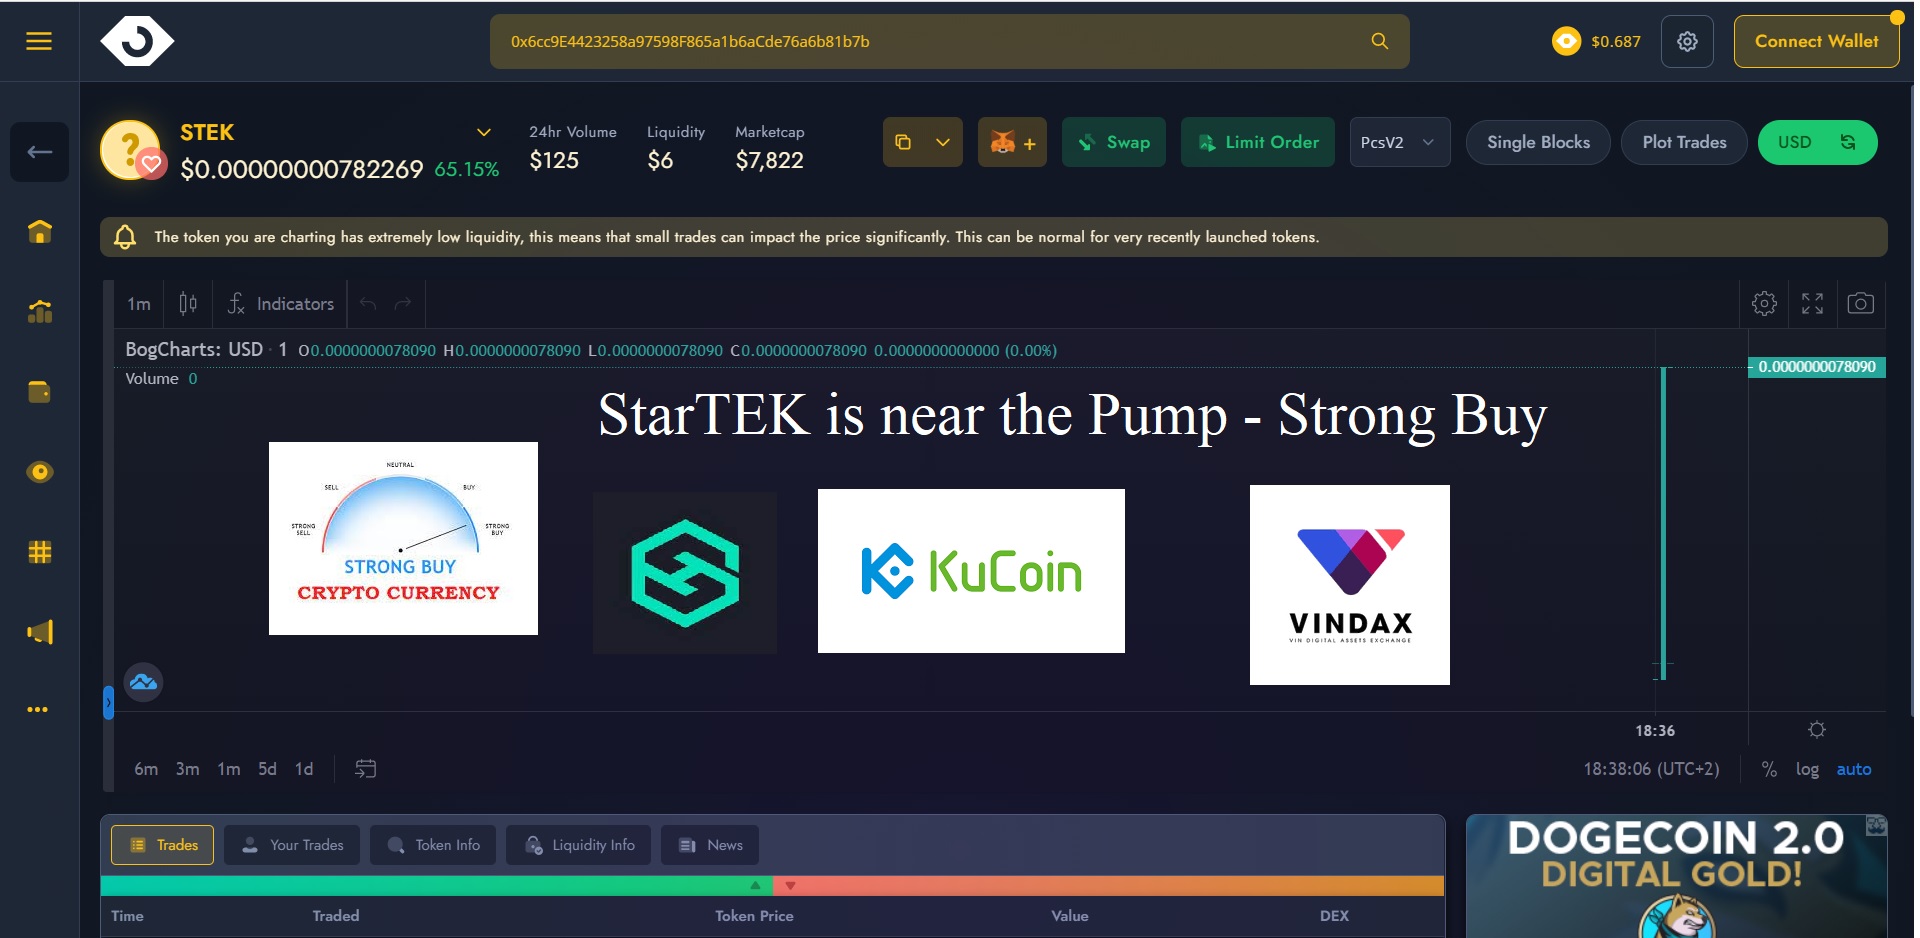 startek-will-be-listed-in-some-important-exchanges-in-the-next-month